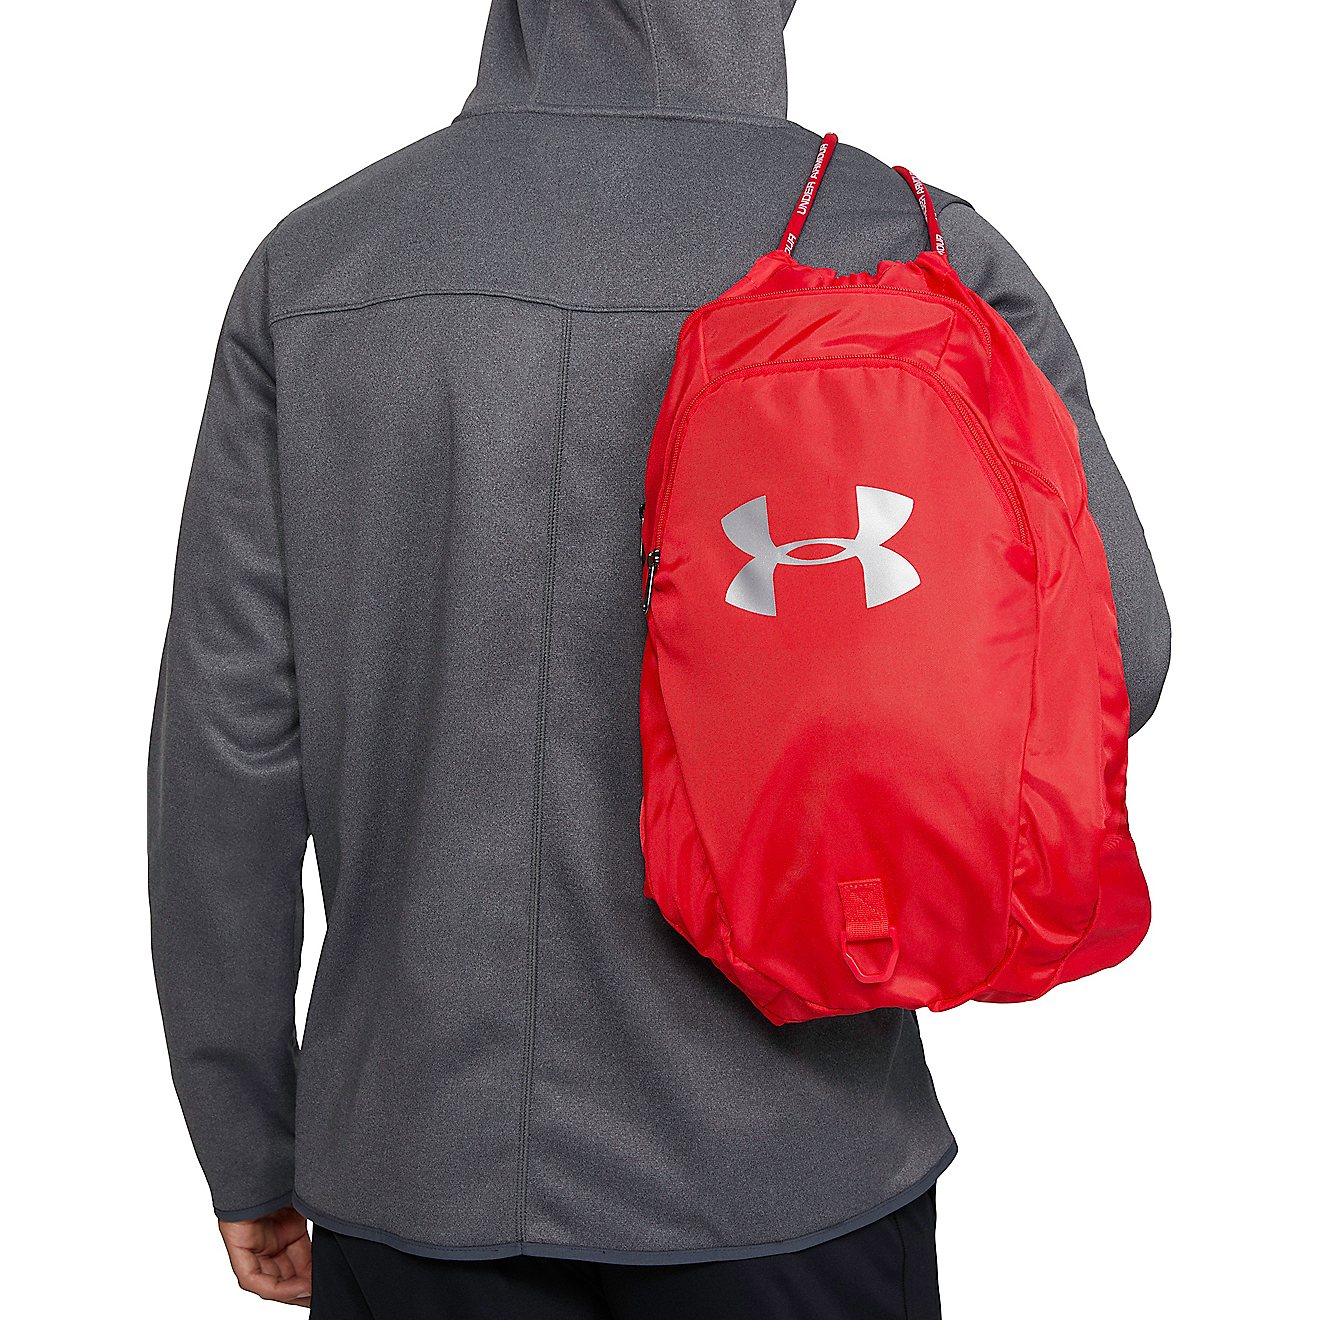 Under Armour Undeniable 2.0 Drawstring Bag                                                                                       - view number 5